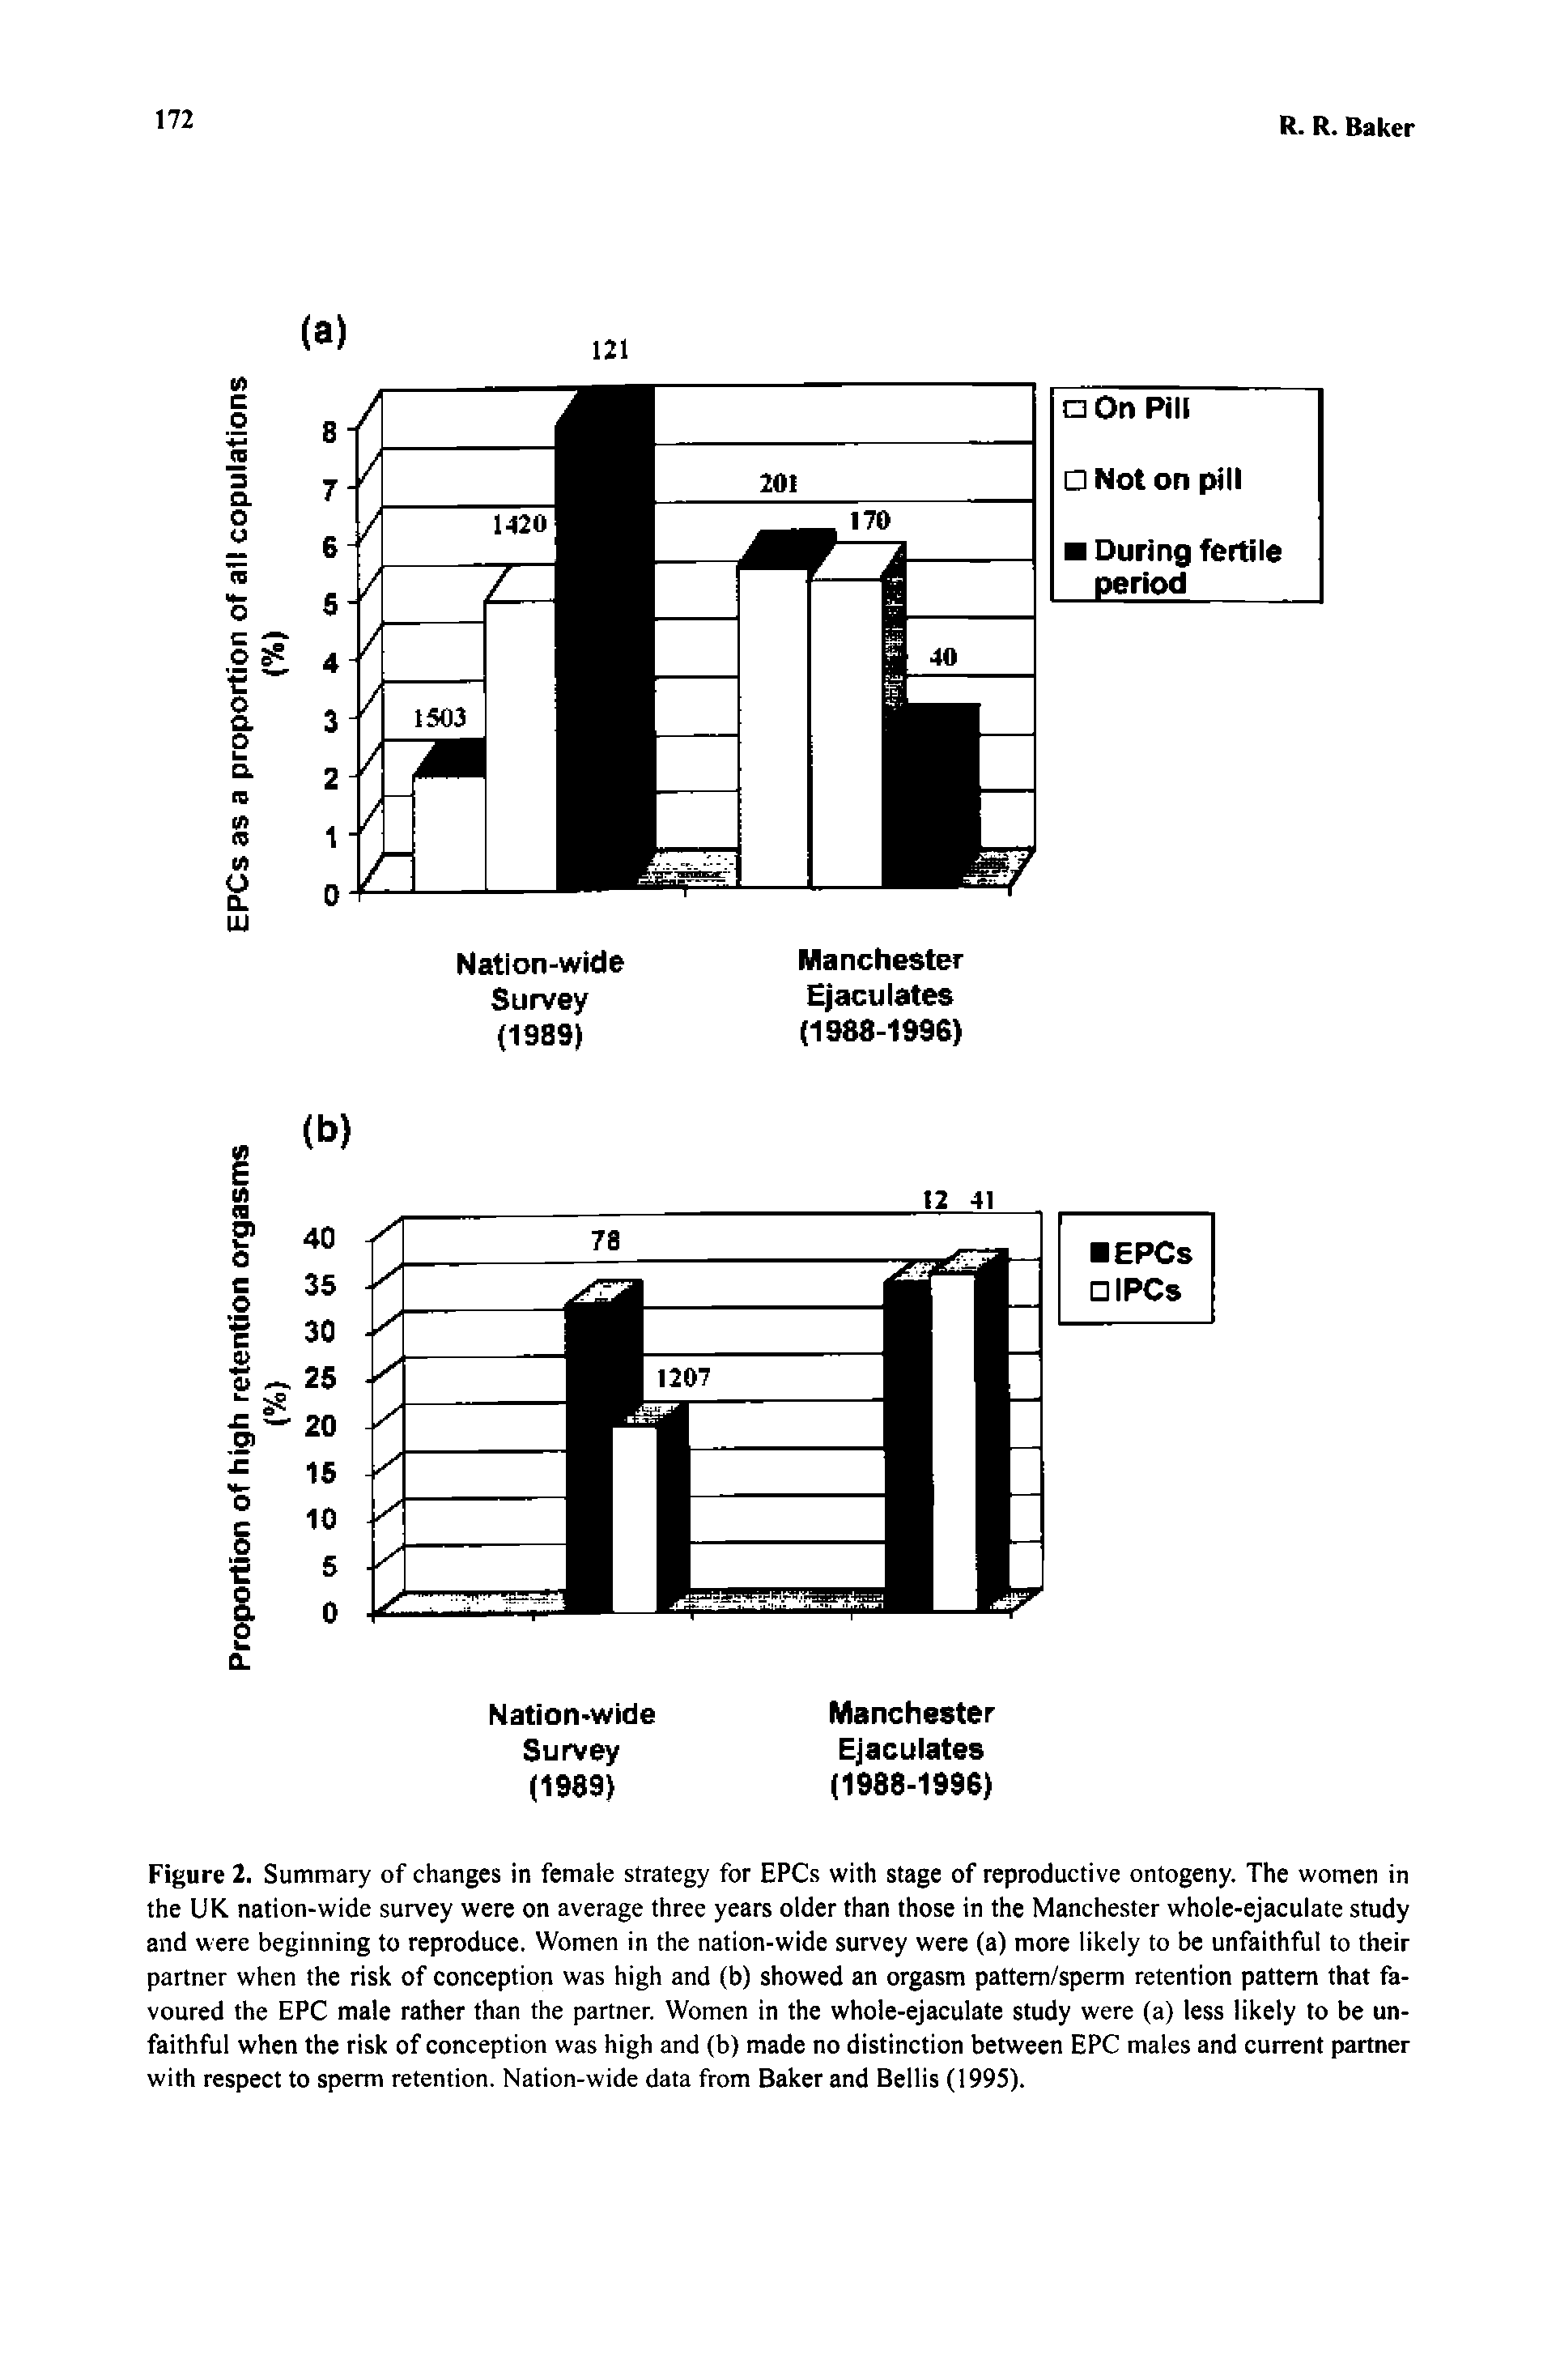 Figure 2. Summary of changes in female strategy for EPCs with stage of reproductive ontogeny. The women in the UK nation-wide survey were on average three years older than those in the Manchester whole-ejaculate study and were beginning to reproduce. Women in the nation-wide survey were (a) more likely to be unfaithful to their partner when the risk of conception was high and (b) showed an orgasm pattem/sperm retention pattern that favoured the EPC male rather than the partner. Women in the whole-ejaculate study were (a) less likely to be unfaithful when the risk of conception was high and (b) made no distinction between EPC males and current partner with respect to sperm retention. Nation-wide data from Baker and Beilis (1995).